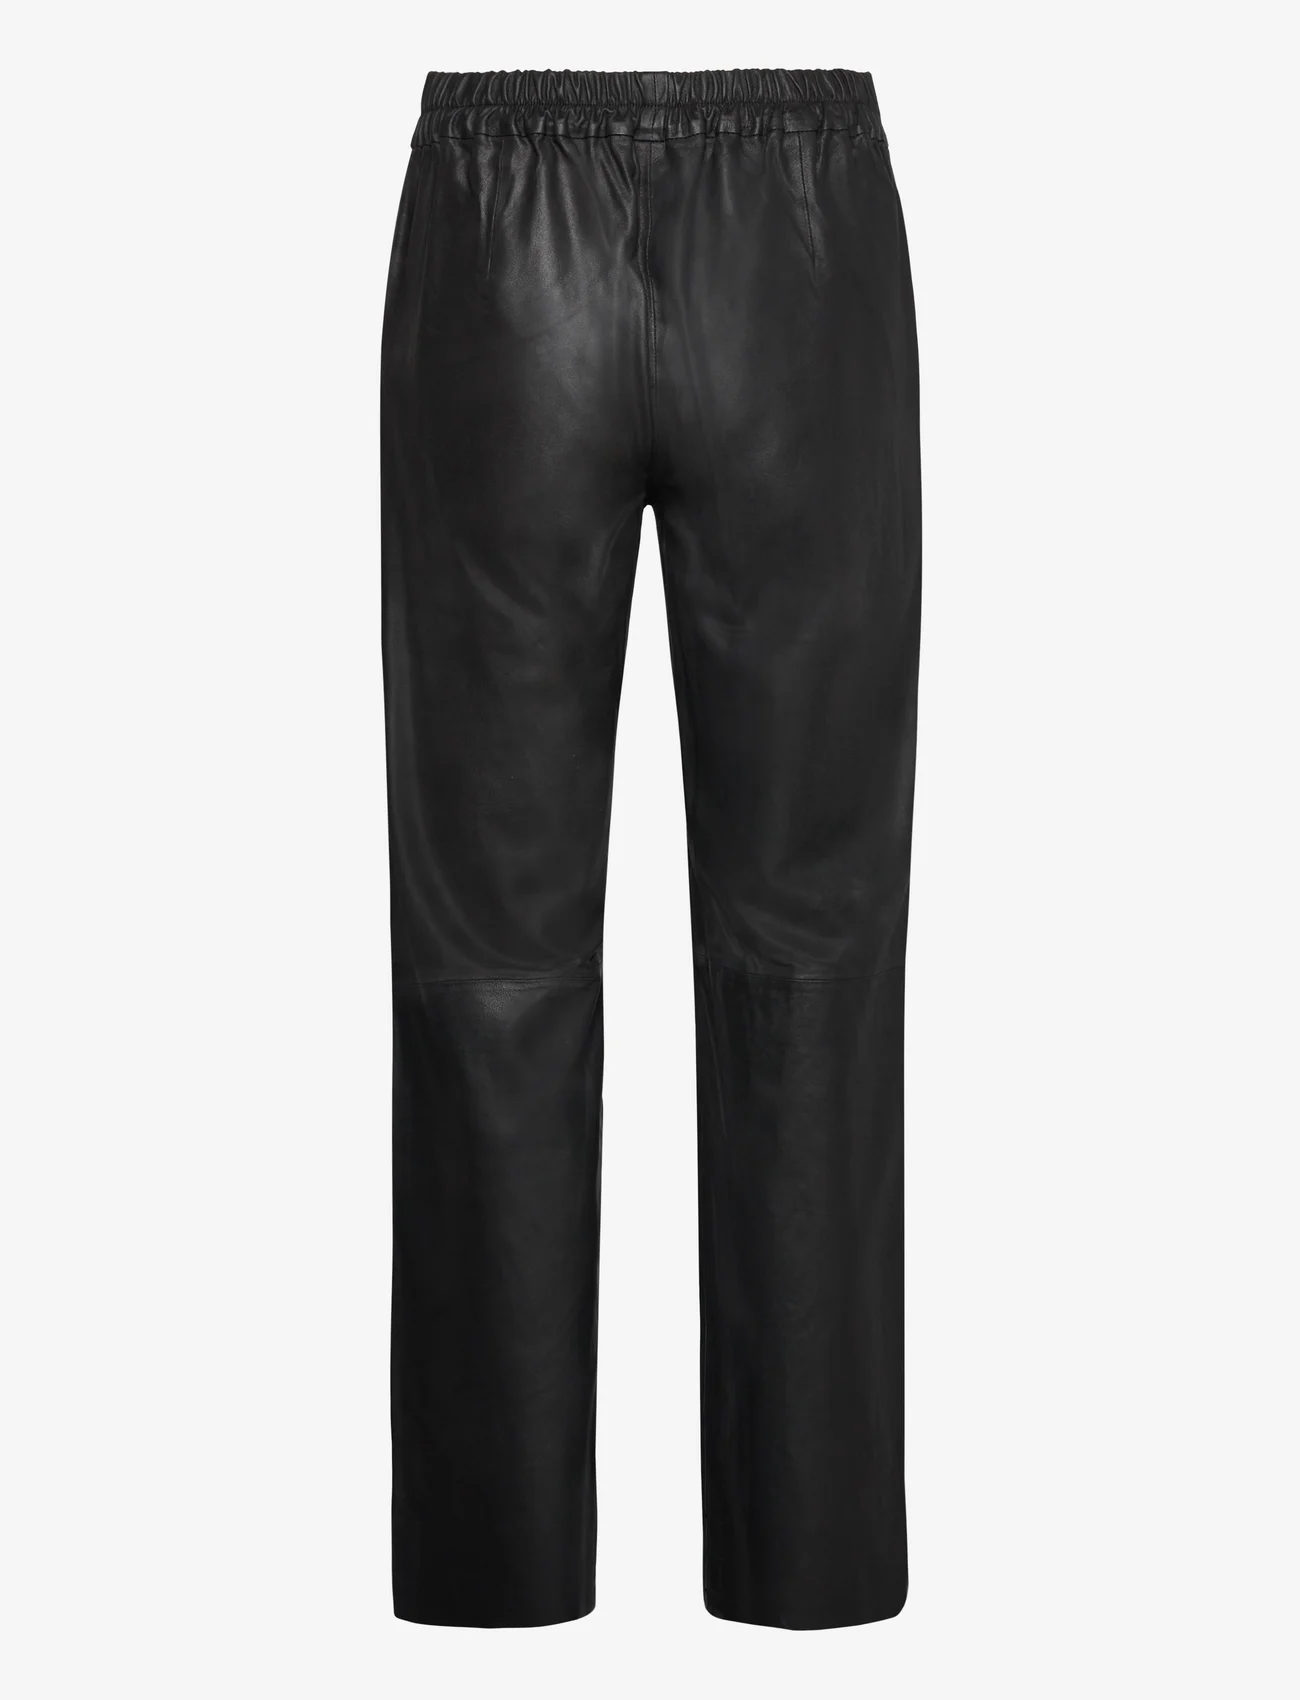 DEPECHE - Pants - party wear at outlet prices - black - 1